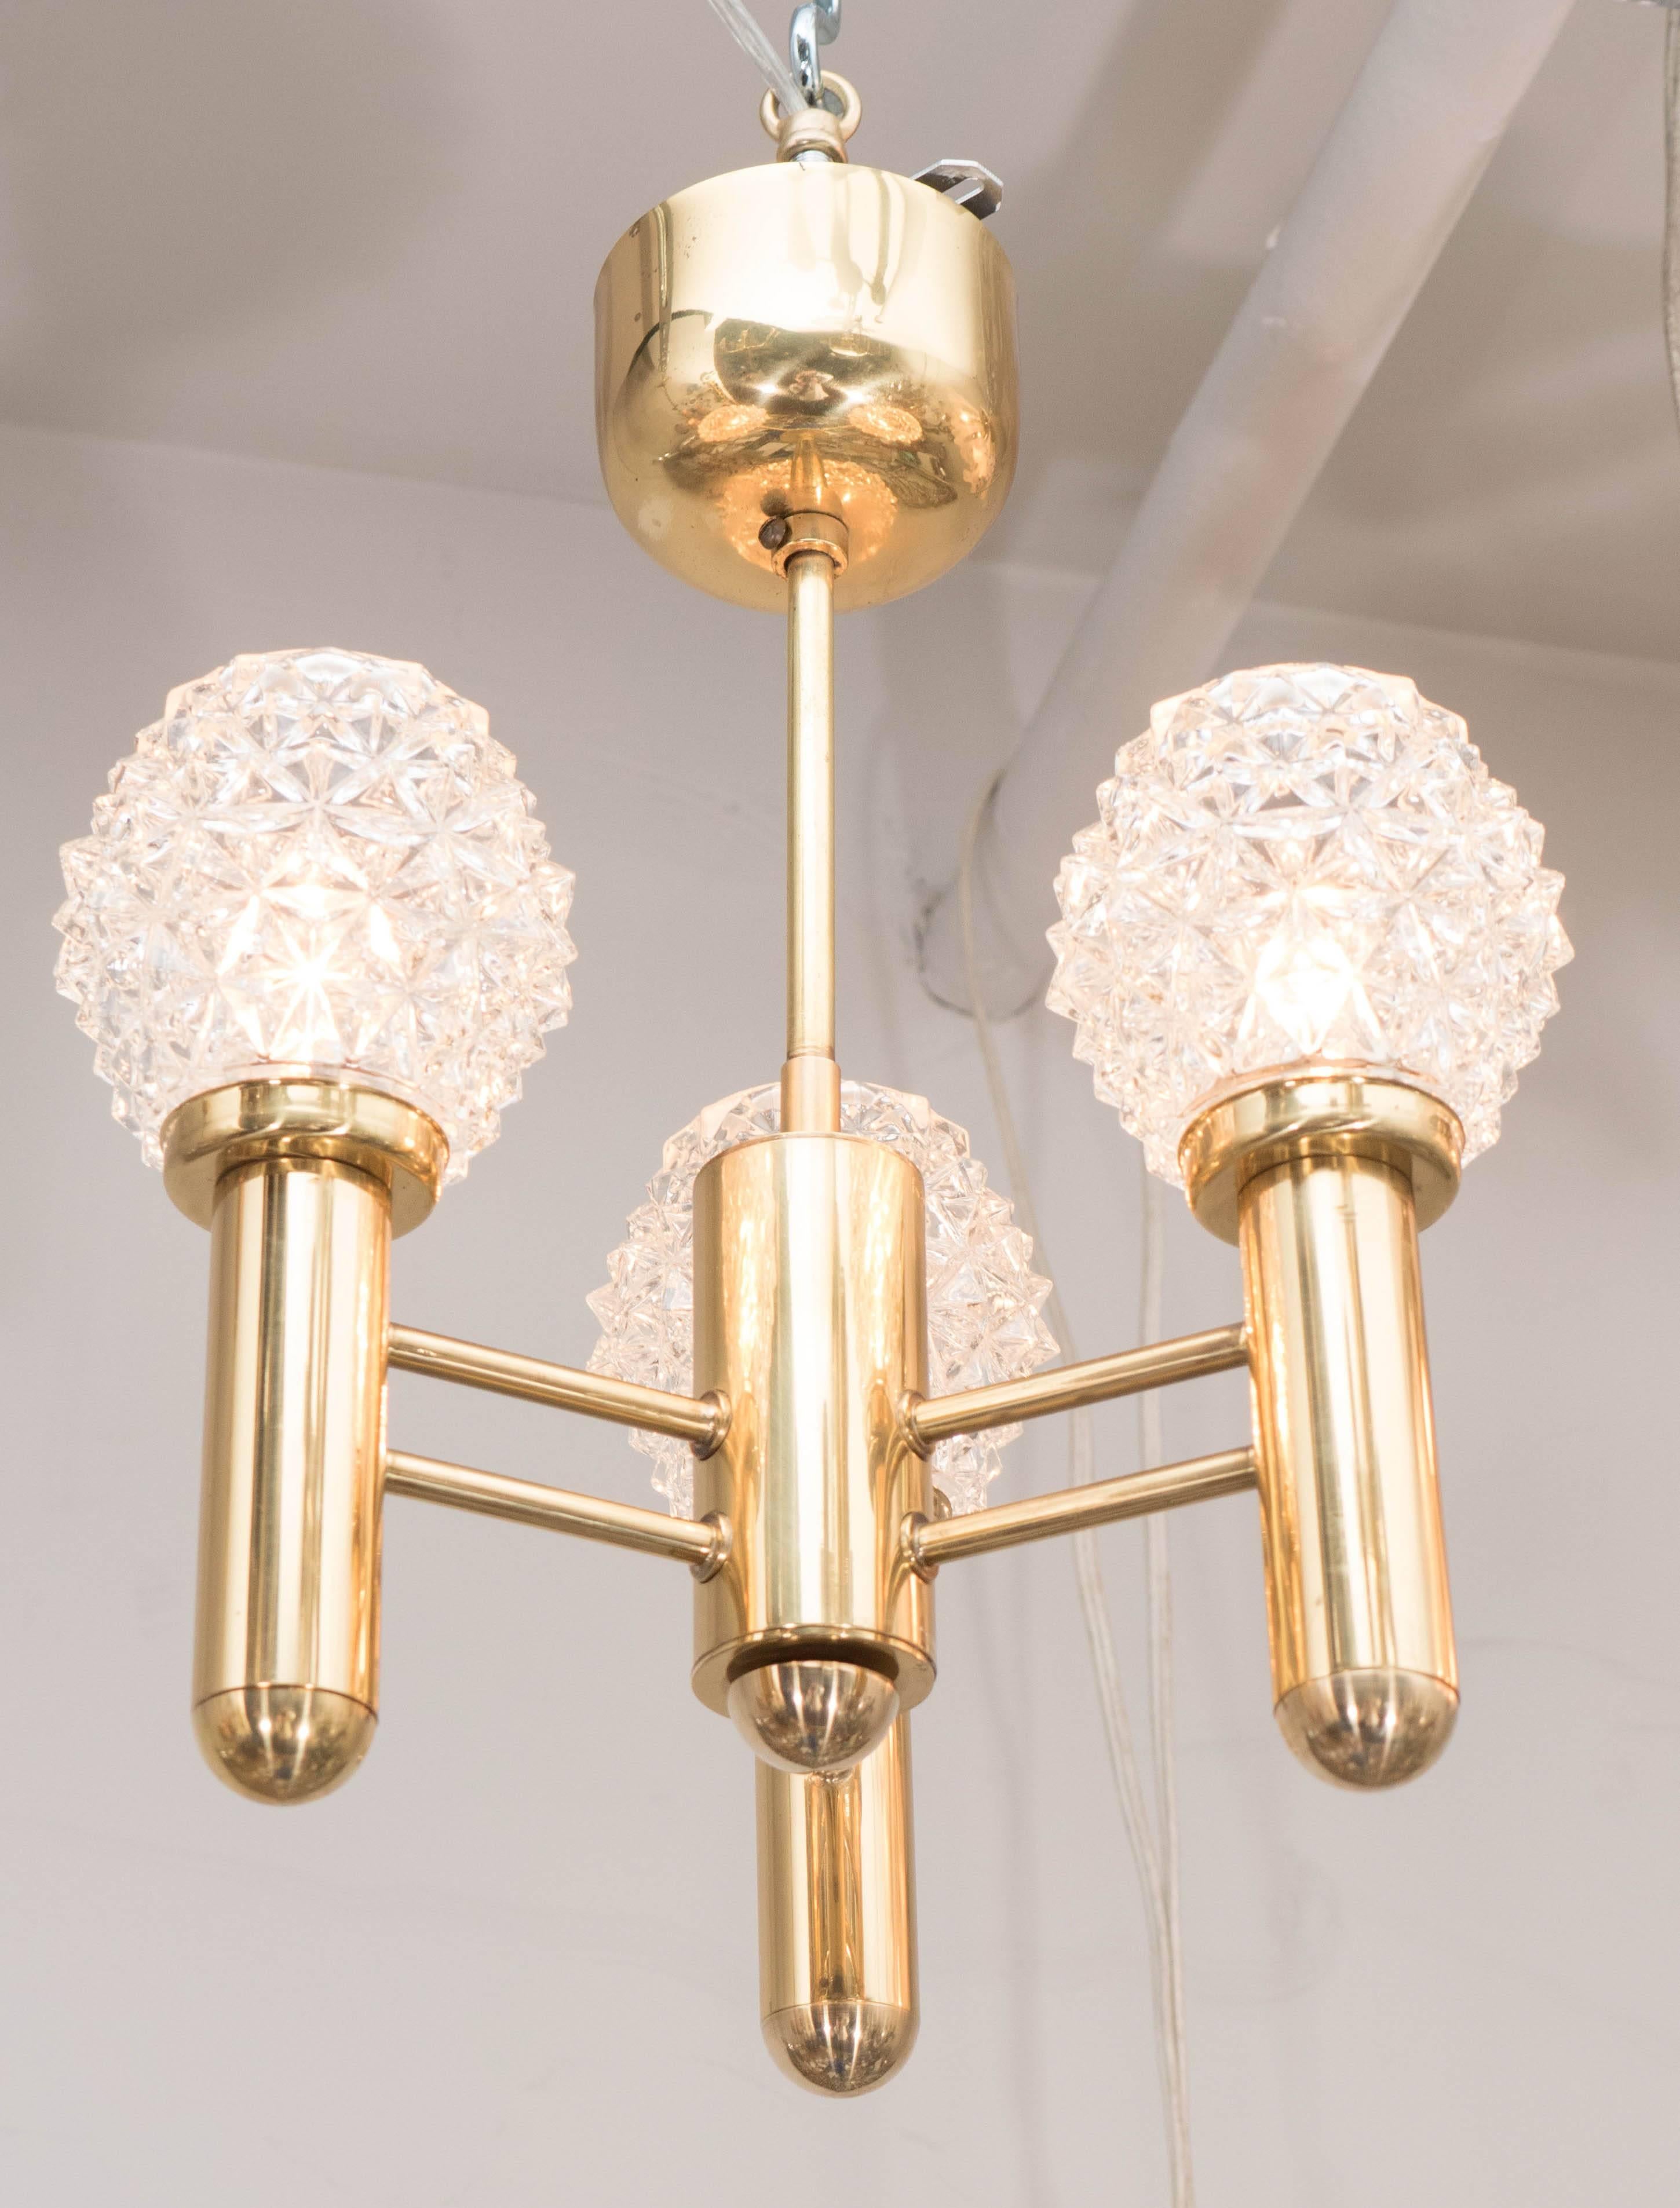 This elegant Mid-Century Modern chandelier was realized in Germany, circa 1960. It features a polished brass frame consisting of three cylindrical bodies adjoined to a central stem of the same form via horizontal cylindrical supports, all in